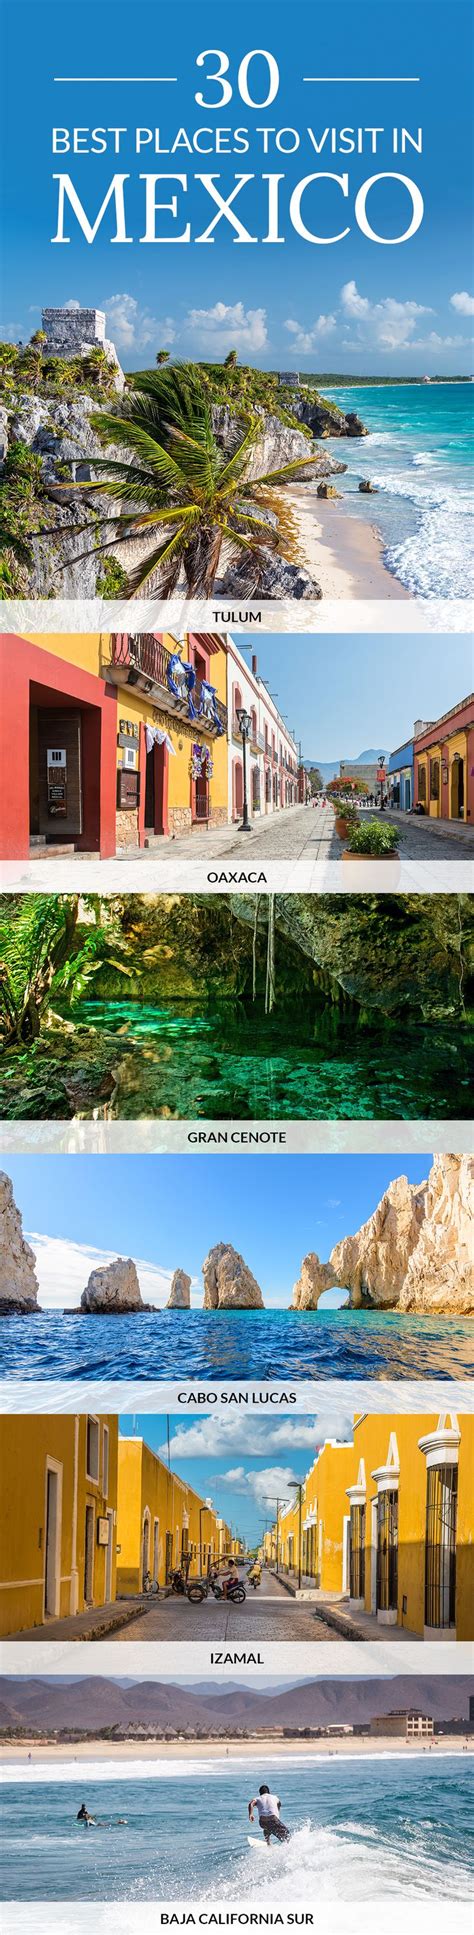 The Best Places To Visit In Mexico Infographical Poster With Images Of